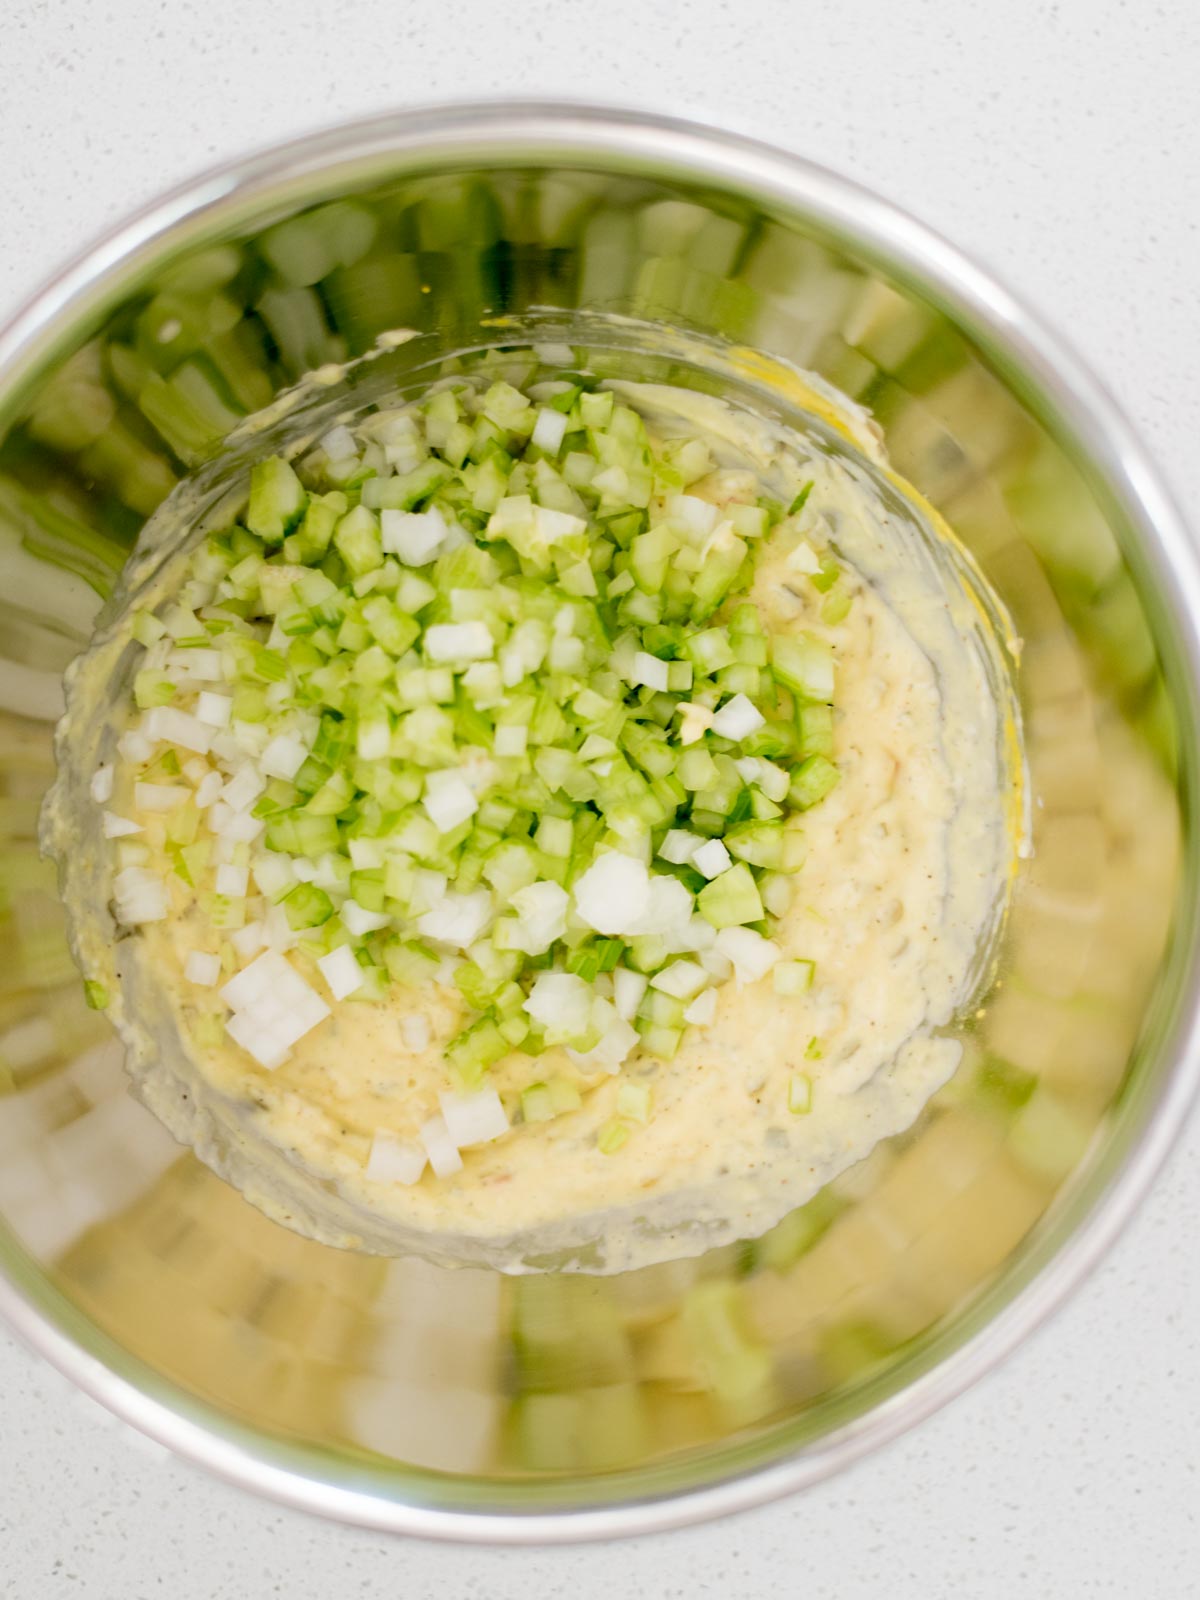 celery and onion added to potato salad dressing in a mixing bowl